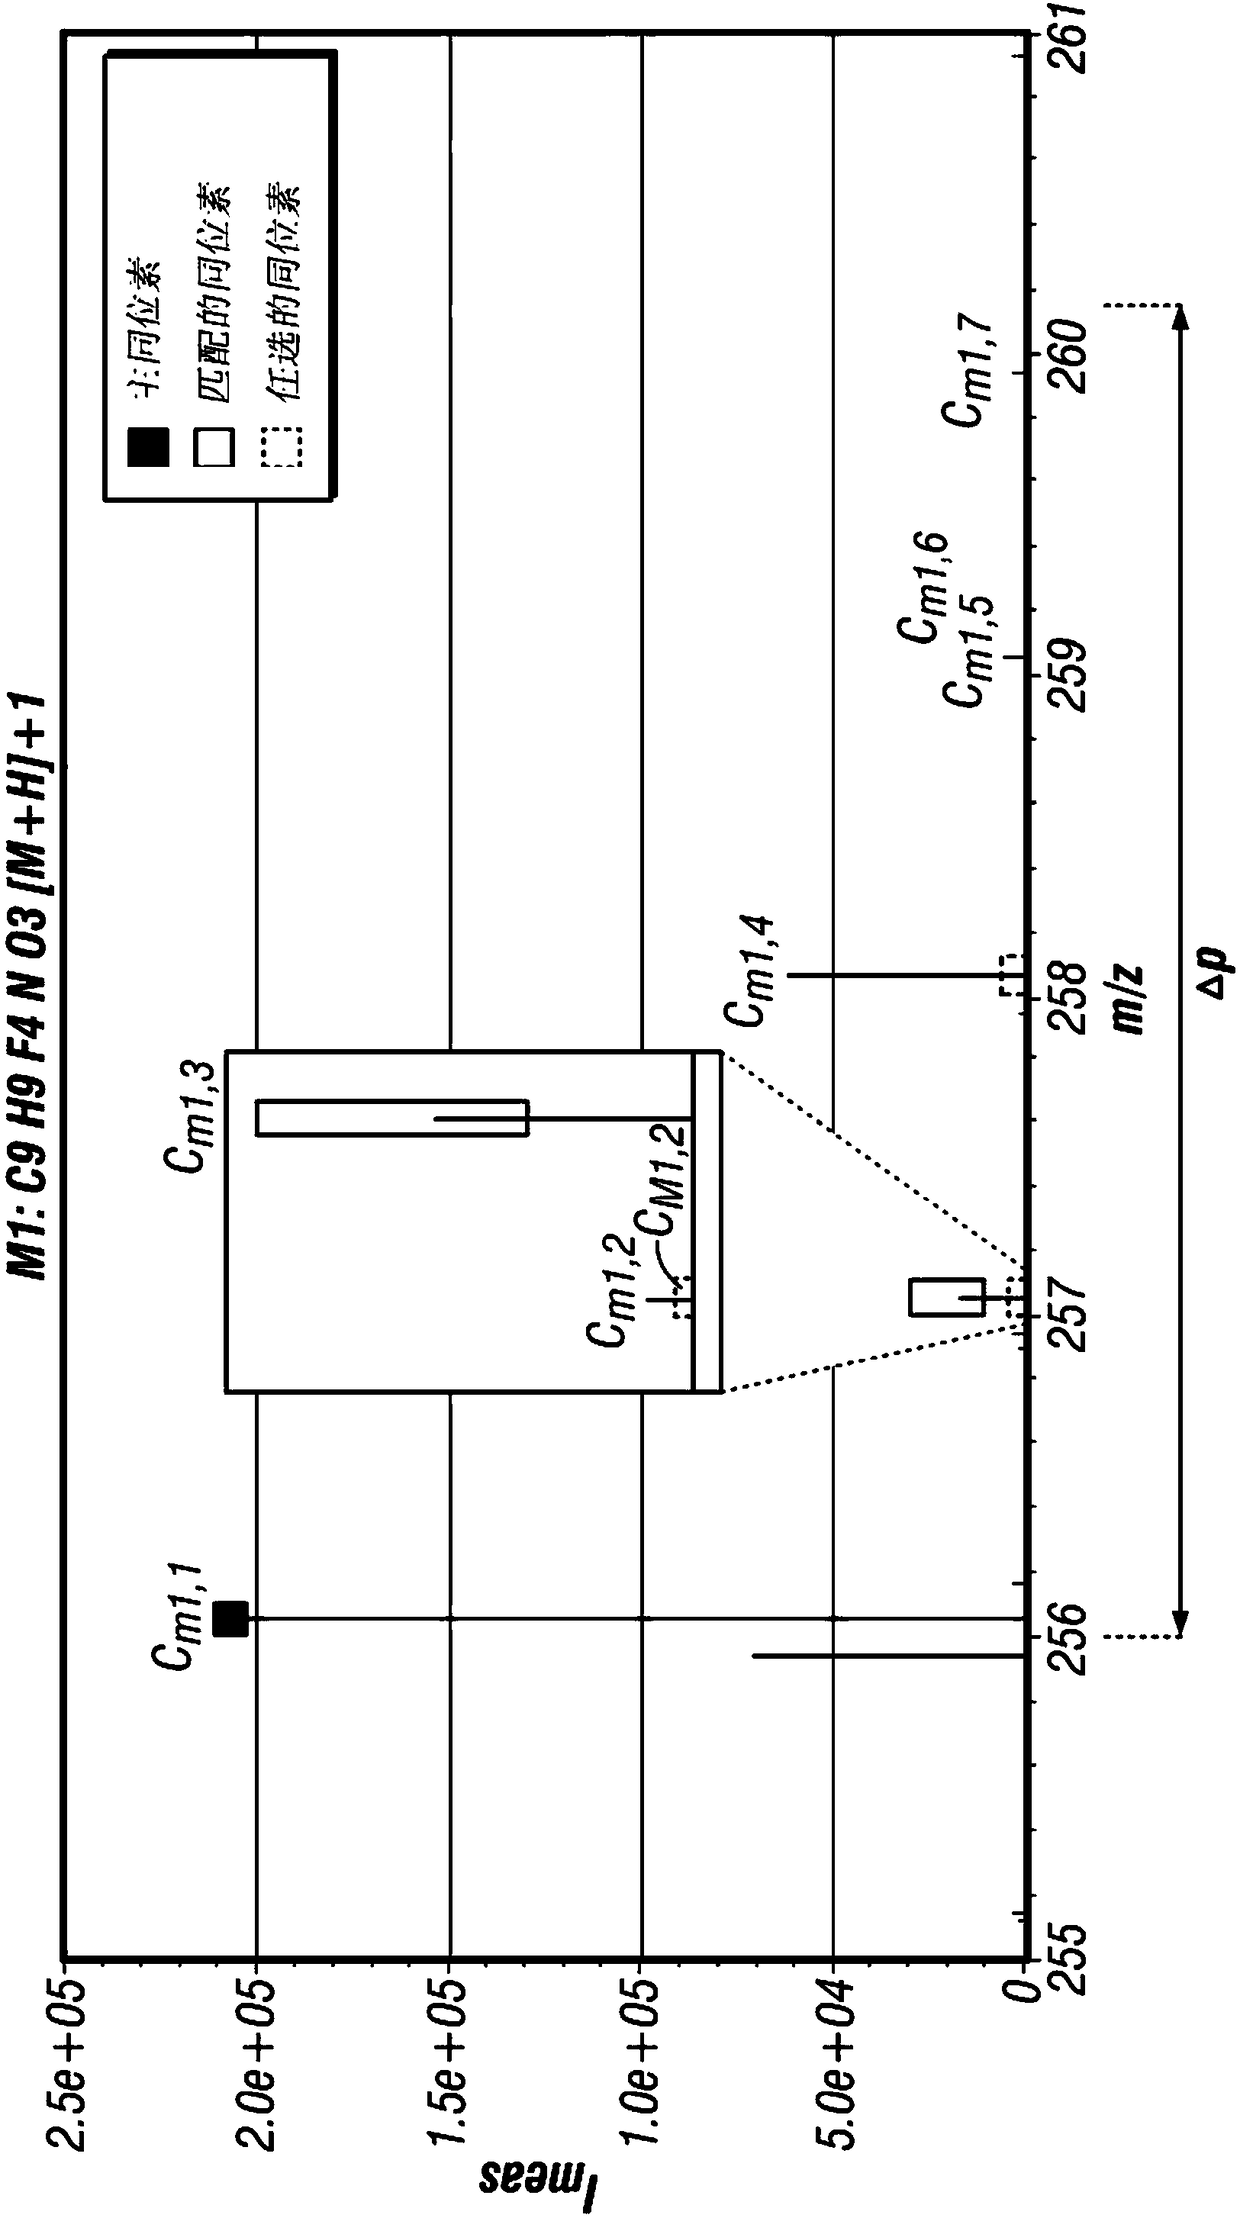 Method for identification of the elemental composition of species of molecules